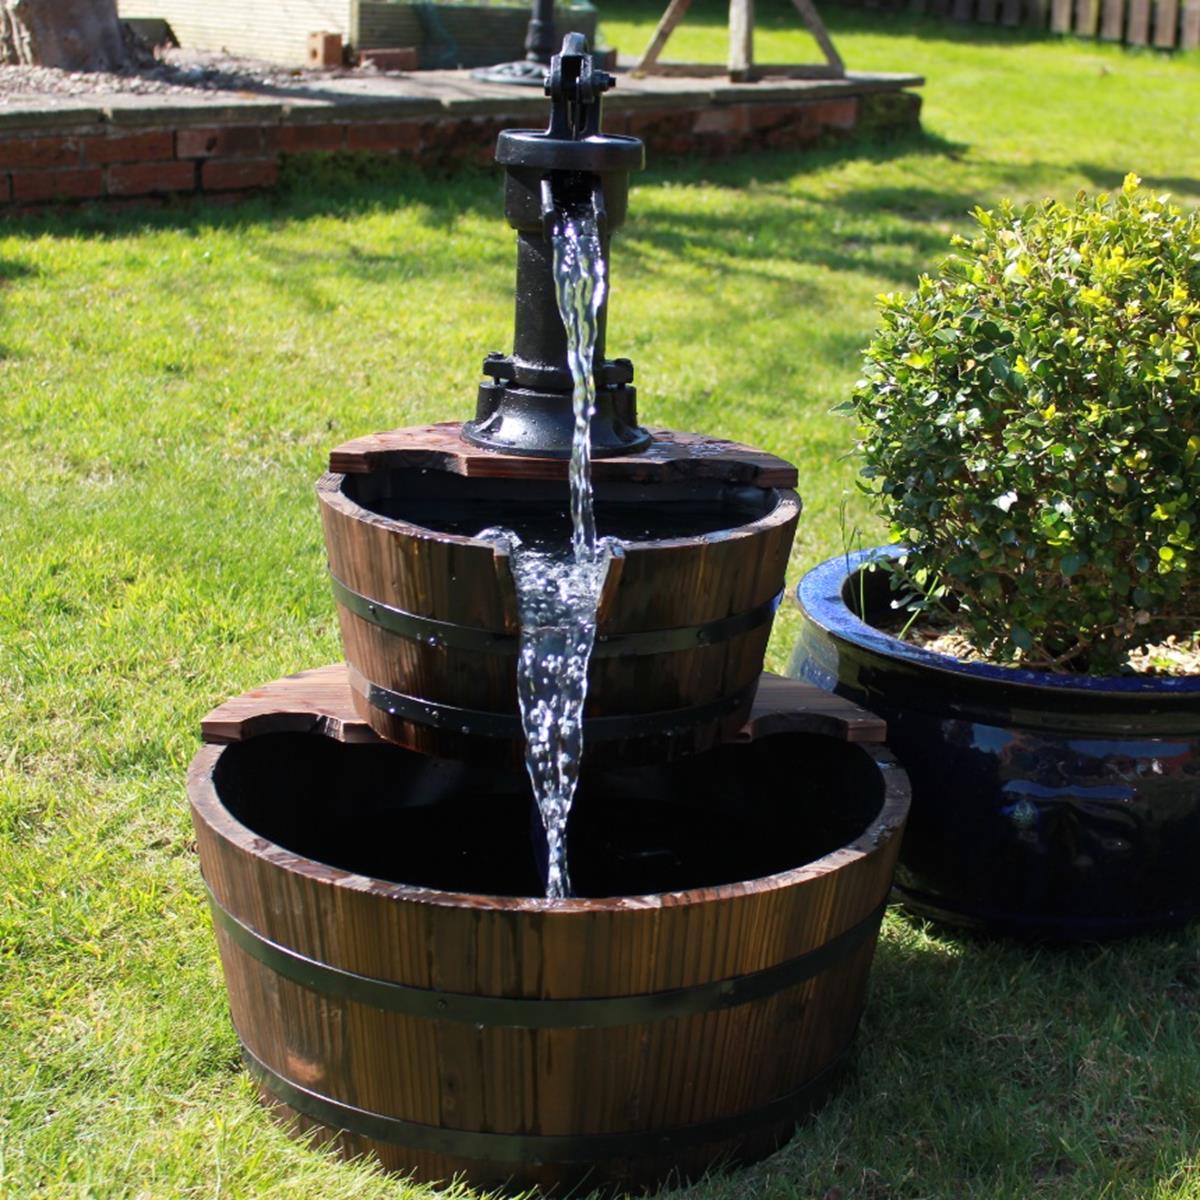 2 Tier Wooden Barrel Water Feature with Cast Iron Pump